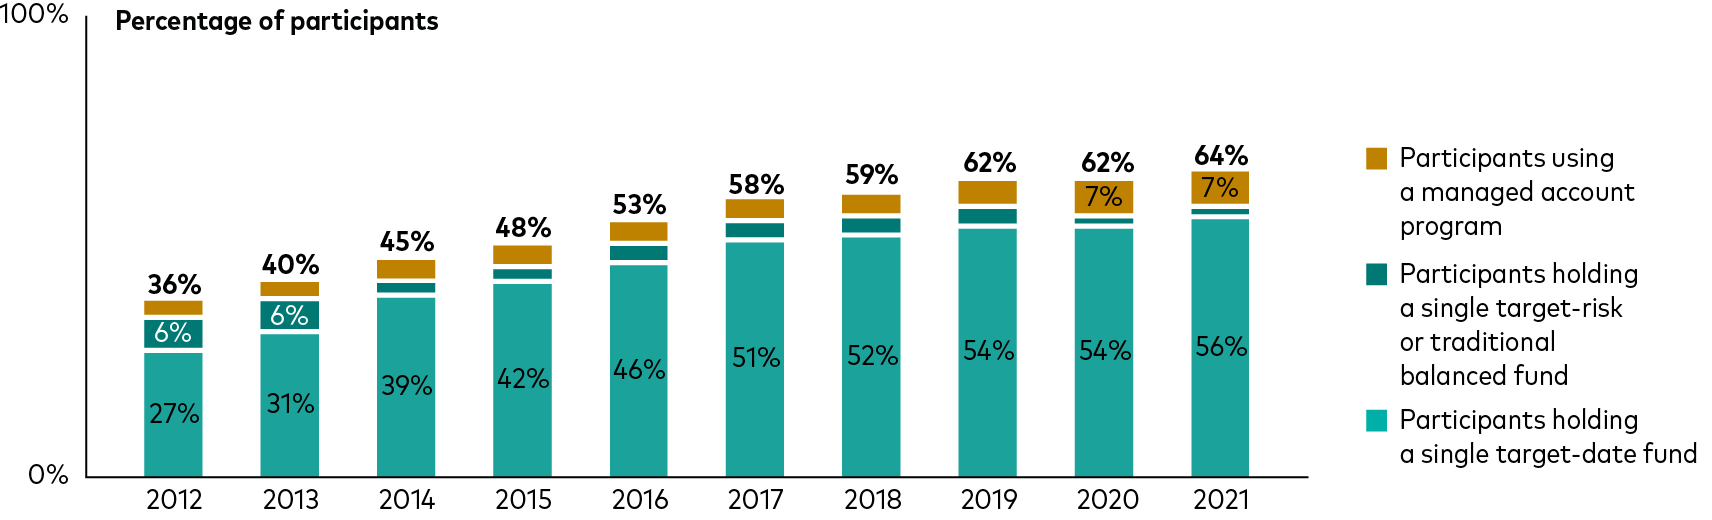 Bar chart shows the percentage of Vanguard defined contribution plan participants using a managed account program, holding a single target-risk or traditional balanced fund, or holding a single target-date fund for each year from 2012 through 2021. The percentage of participants holding a single target-date fund increased from 27% in 2012 to 56% in 2021, while the percentage holding a single target-risk or traditional balanced fund declined from 6% to 1% and the percentage using a managed account program grew from 3% to 7%.